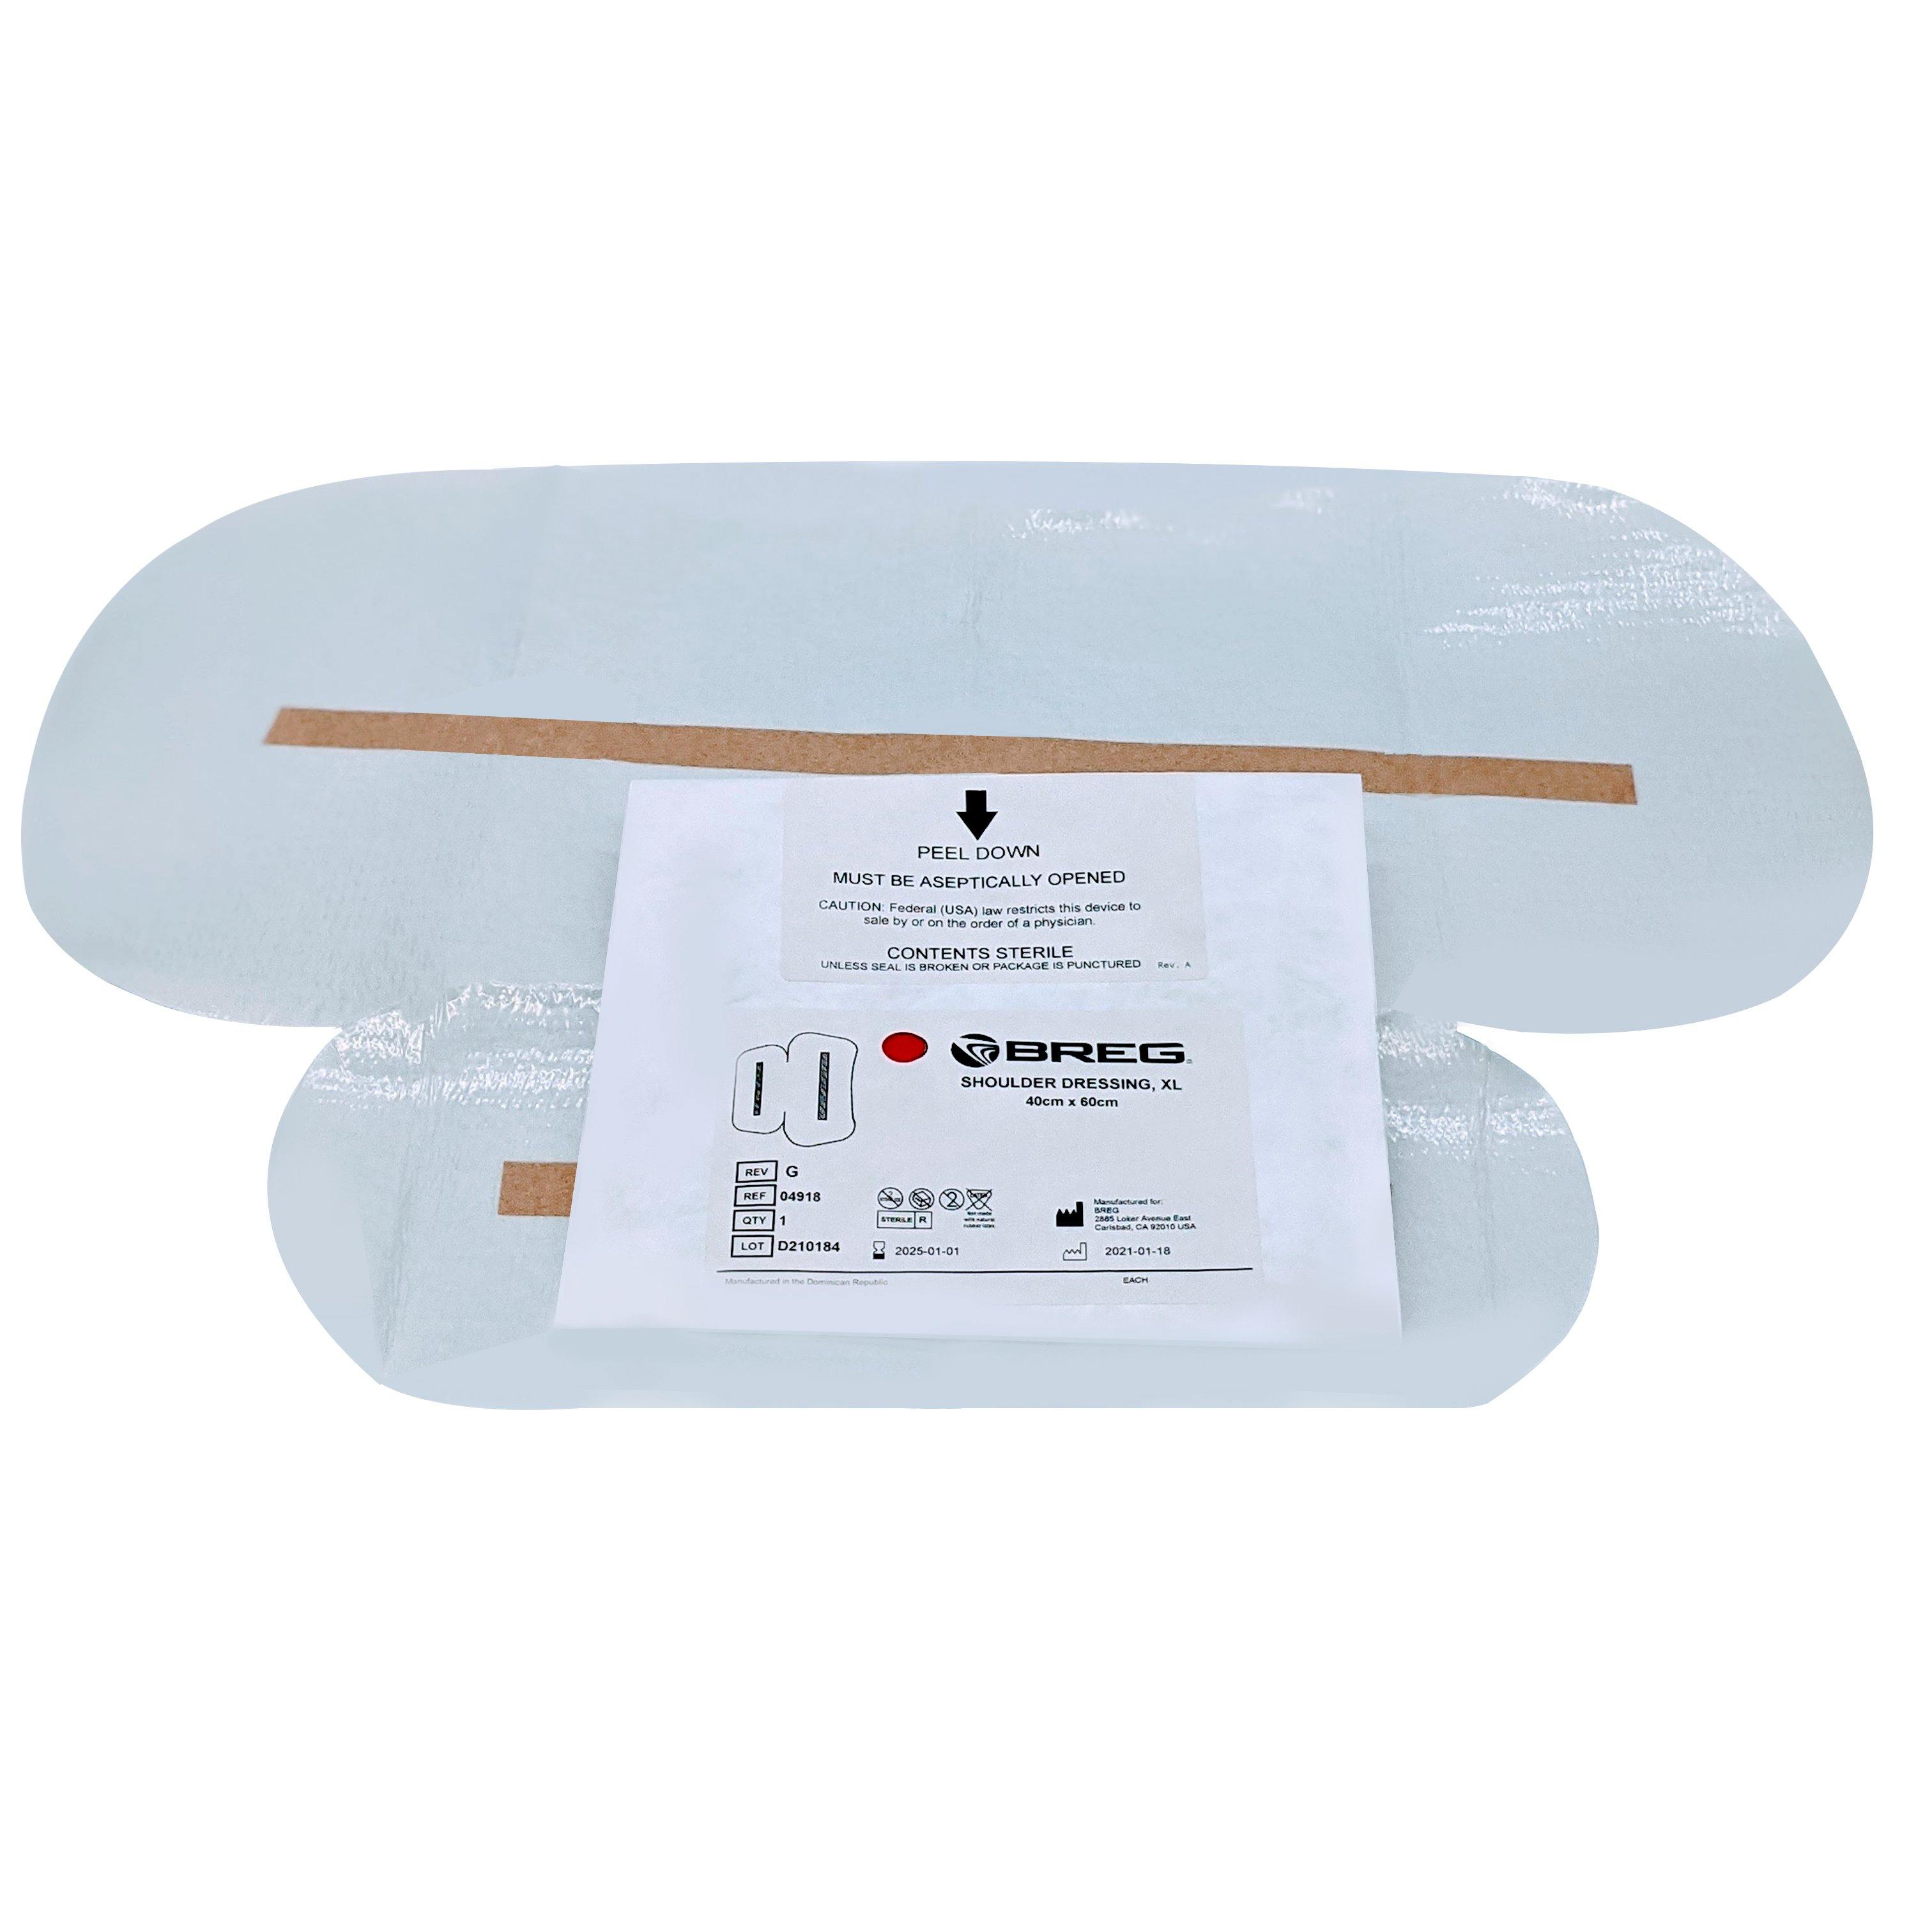 Breg® Polar Care Cube & Glacier Sterile Dressings - 02344 Breg® Polar Care Cube & Glacier Sterile Dressings - undefined by Supply Physical Therapy Accessories, Breg, Breg Accessories, Cube, Cube Accessories, Glacier, Glacier Accessories, Replacement, Sterile, Wraps